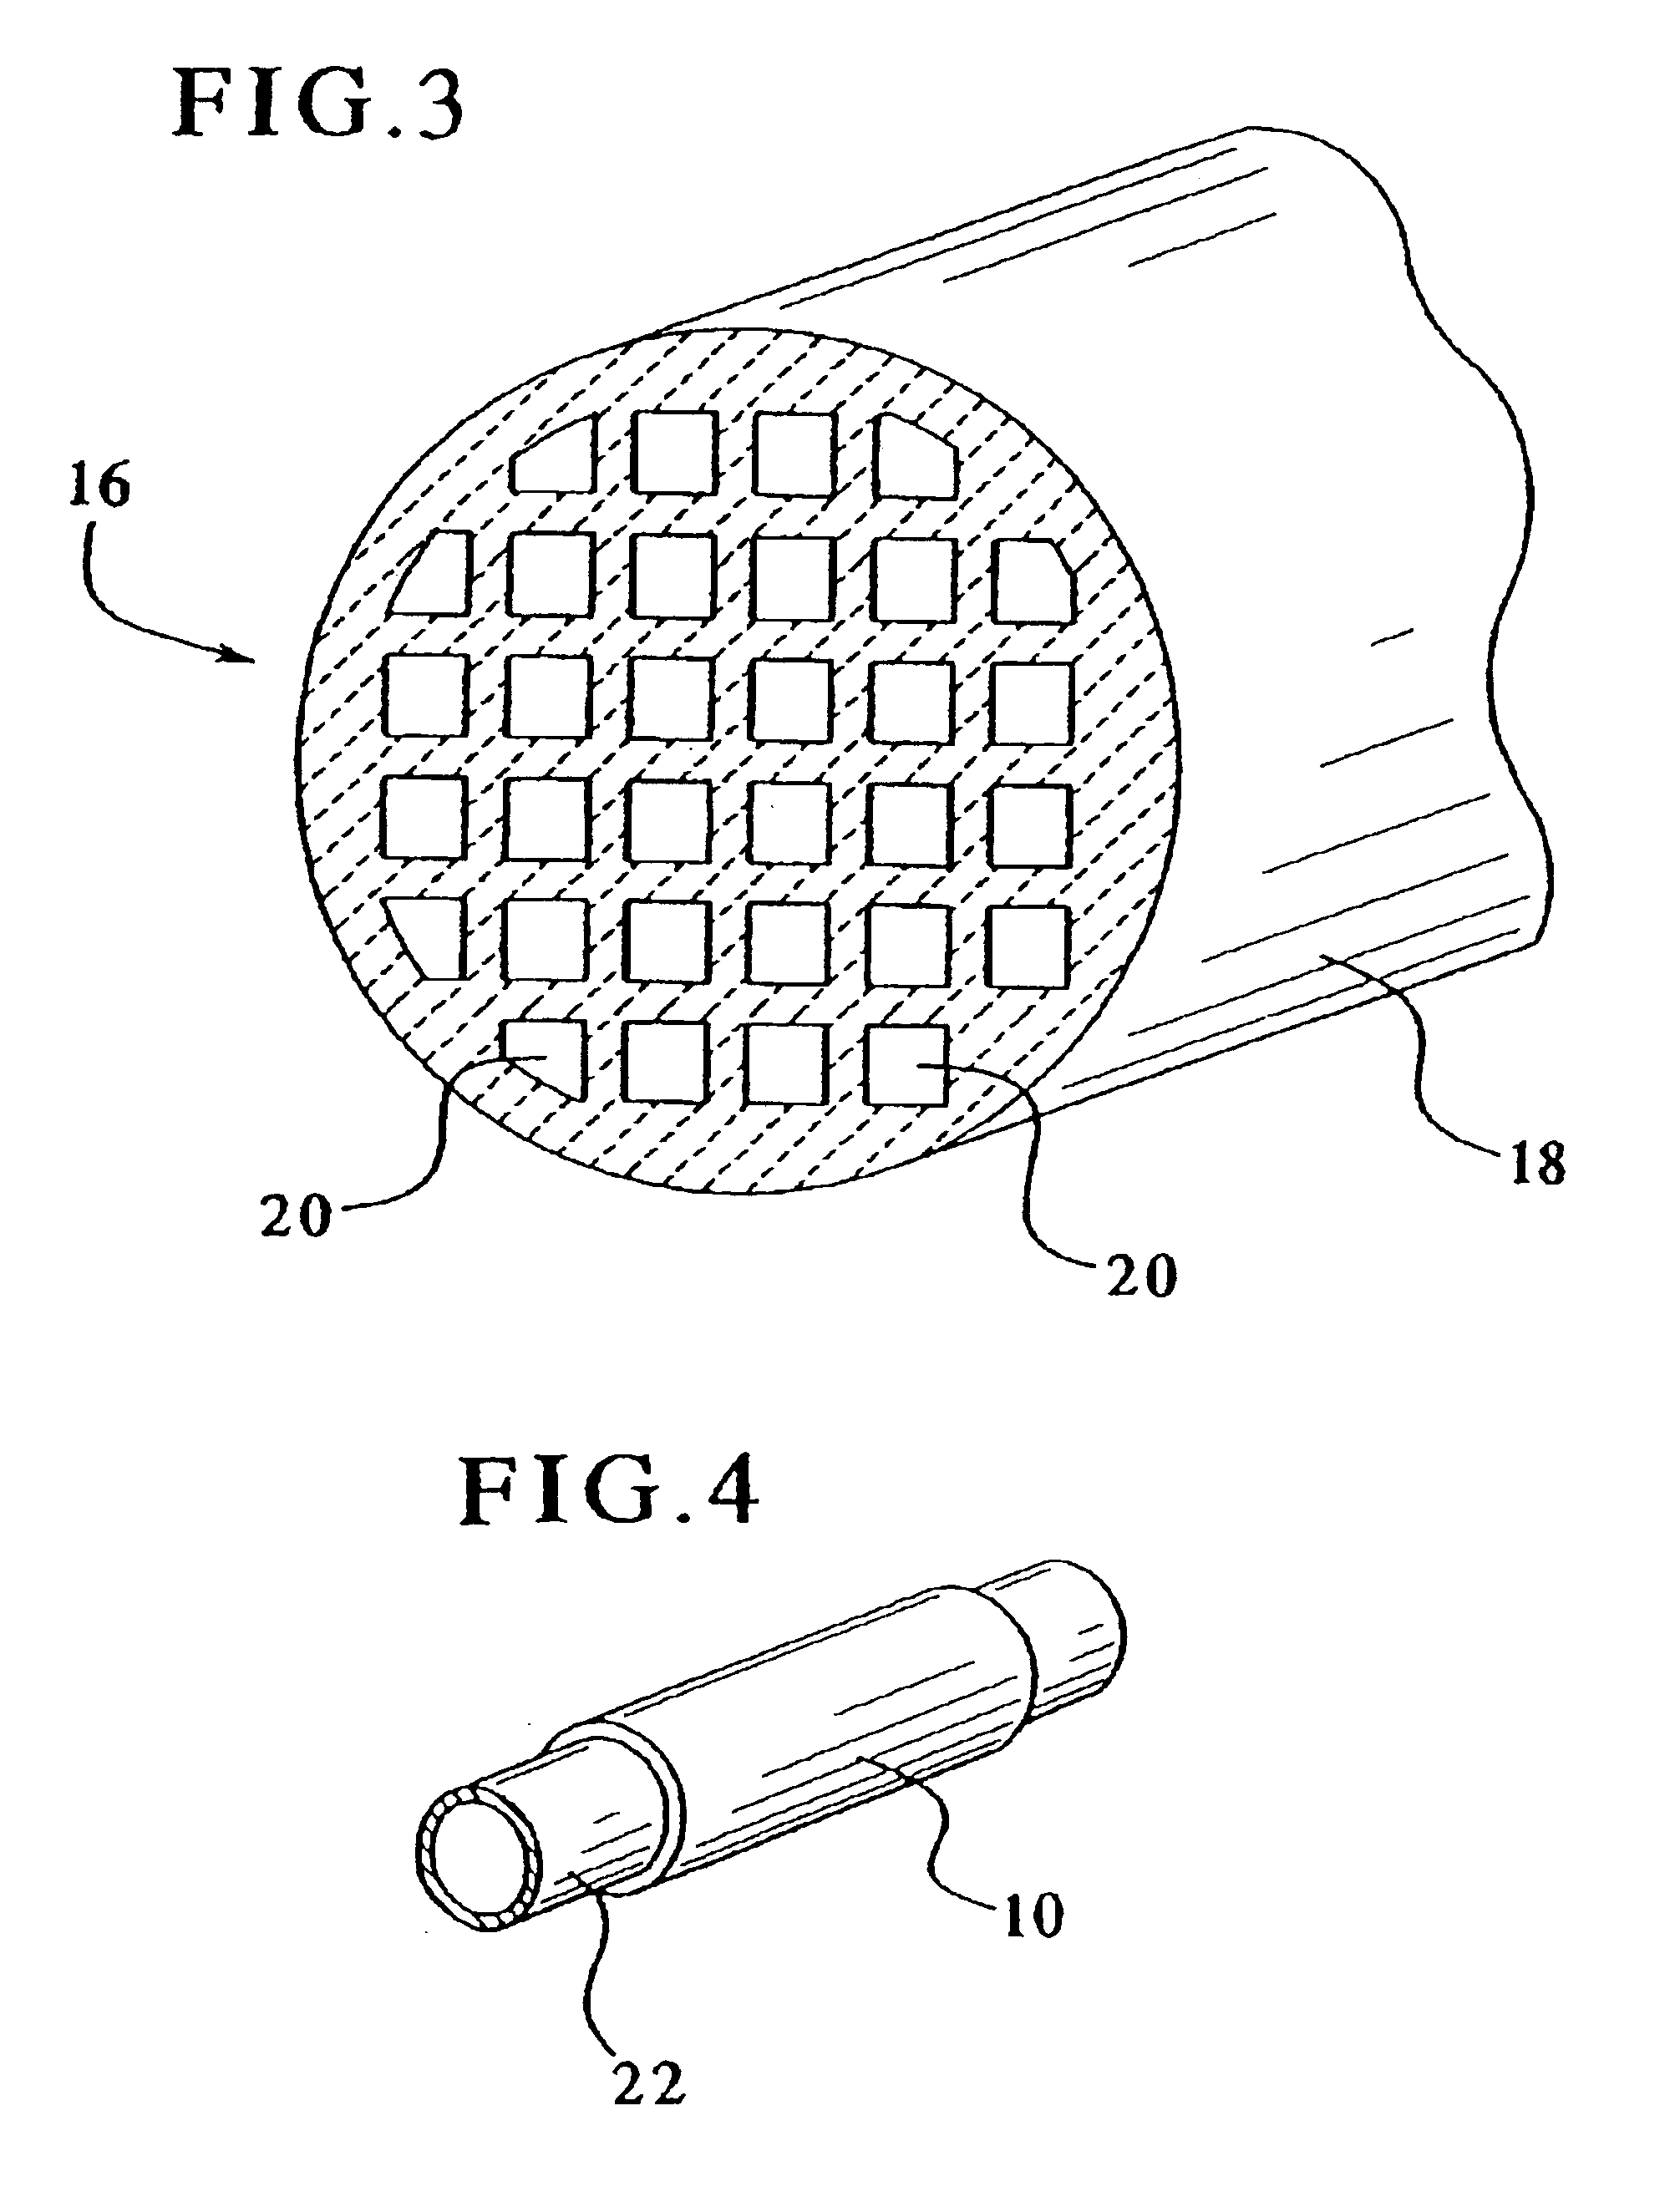 Apparatuses, devices, systems and methods employing far infrared radiation and negative ions